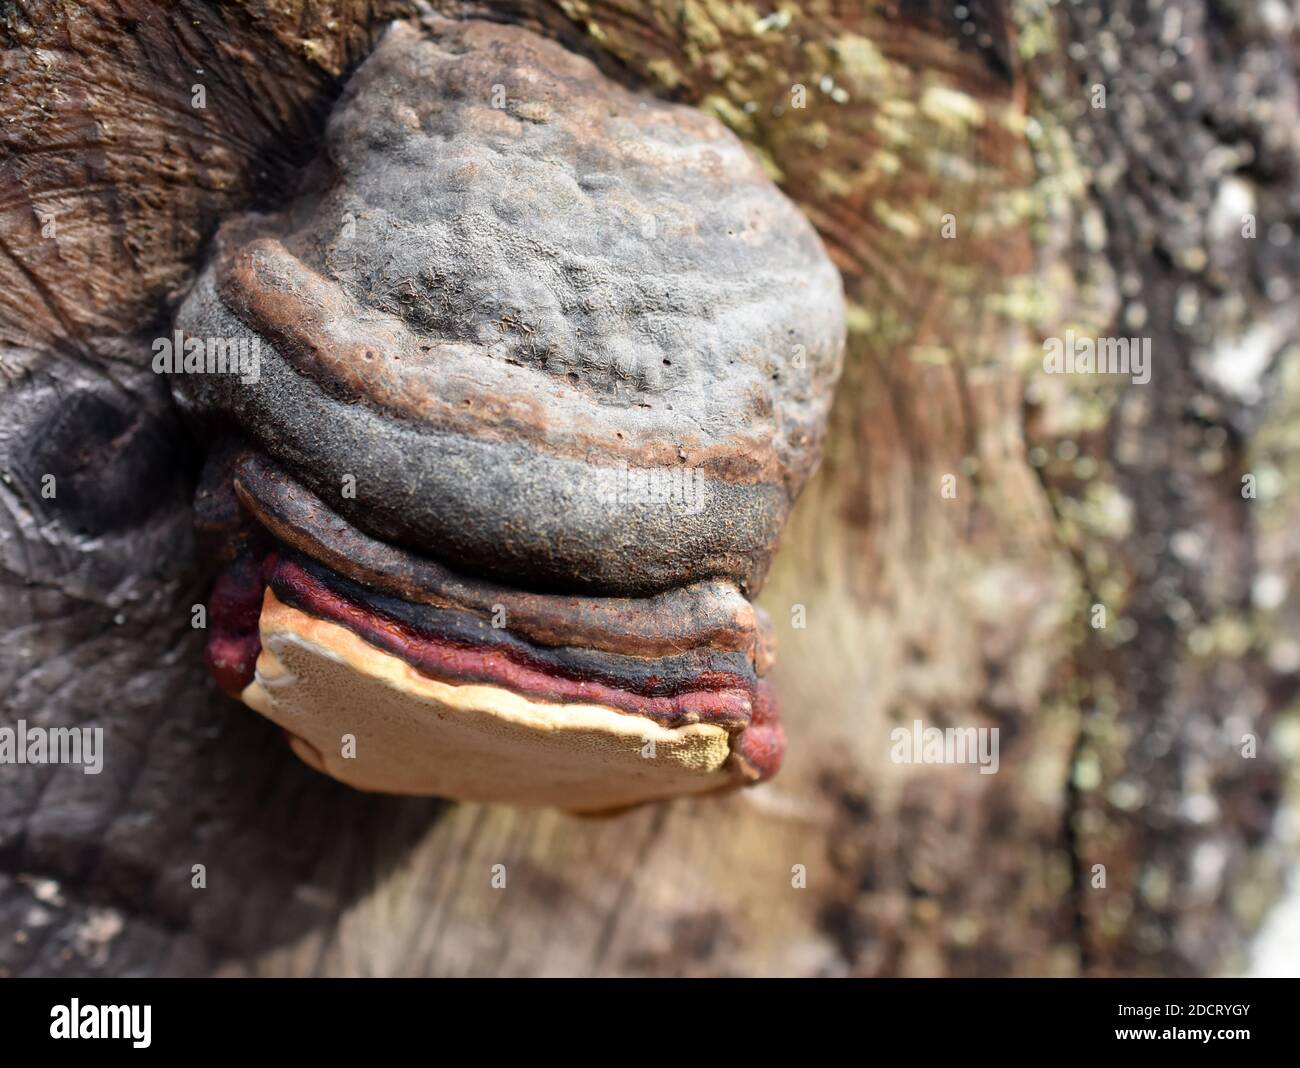 Red-belt conk Fomitopsis pinicola growing on a log Stock Photo